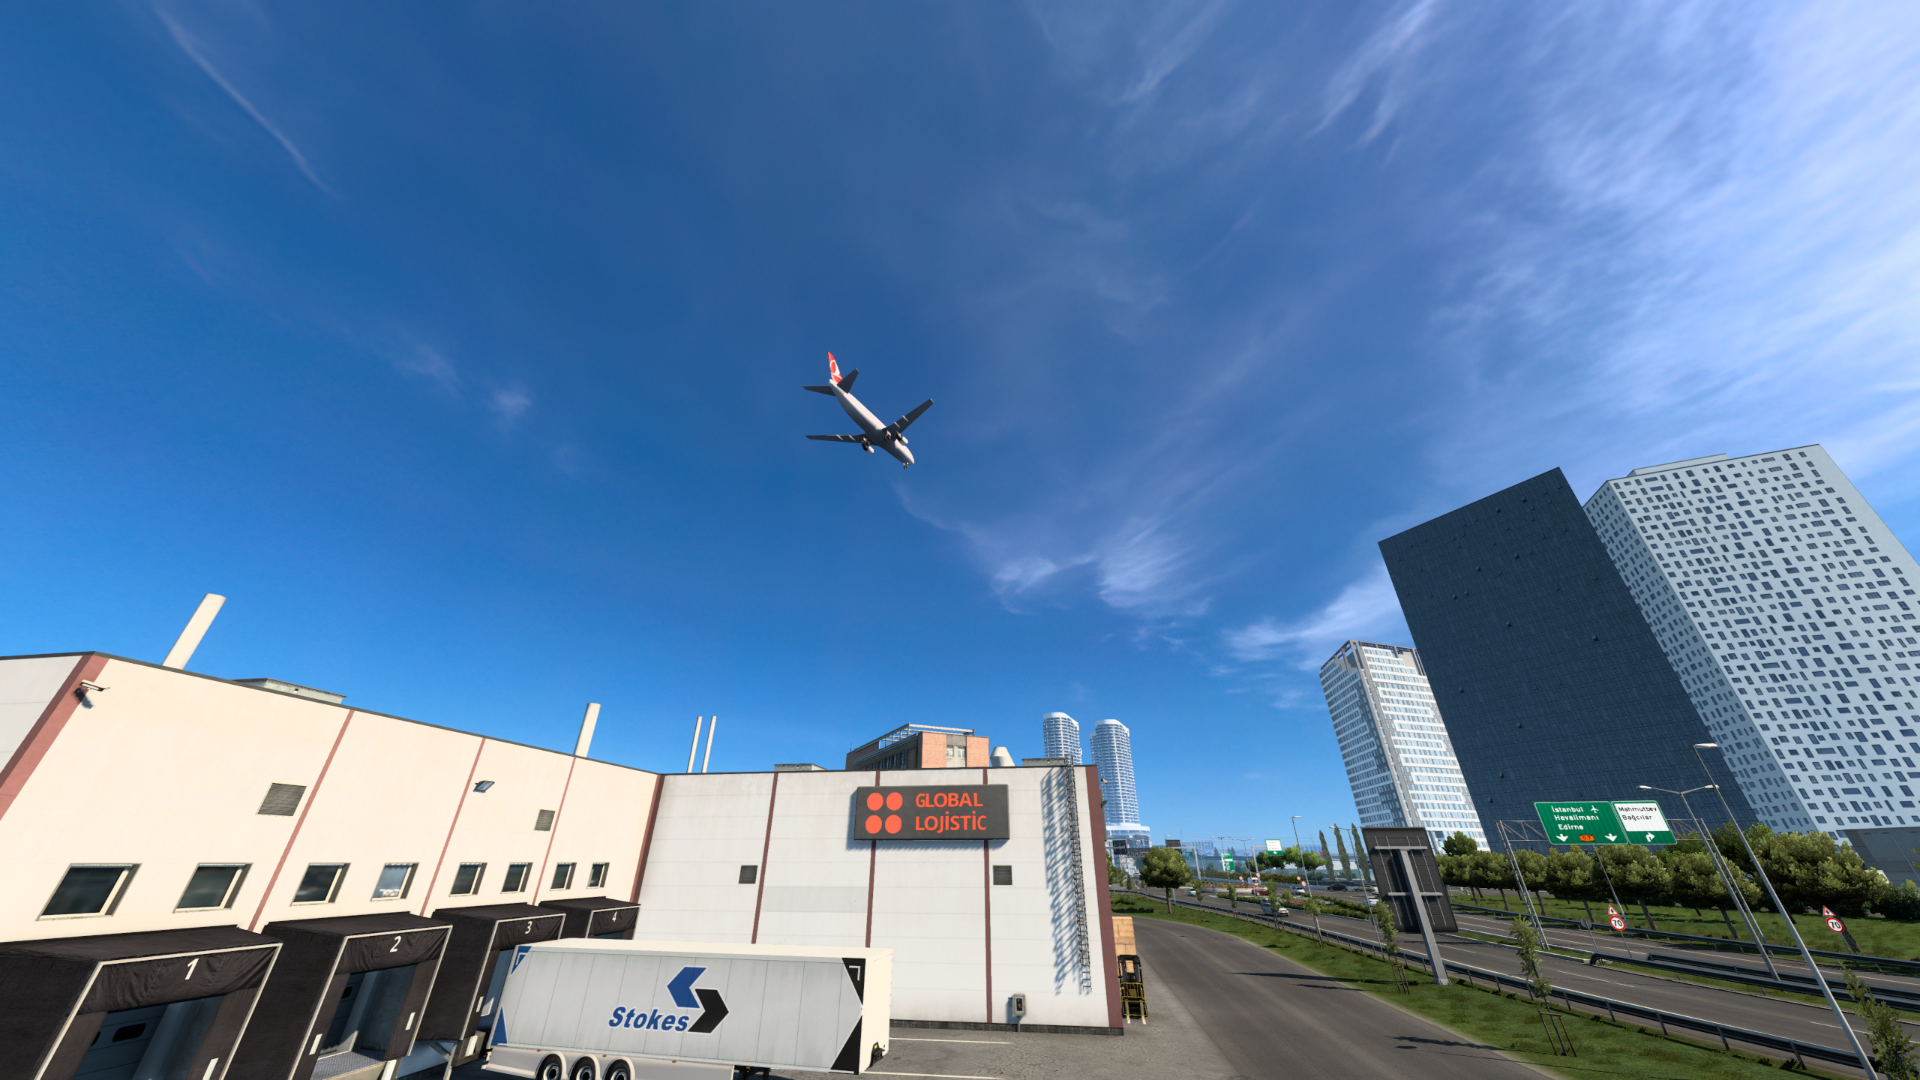 ets2_20220501_182659_00-1920.png